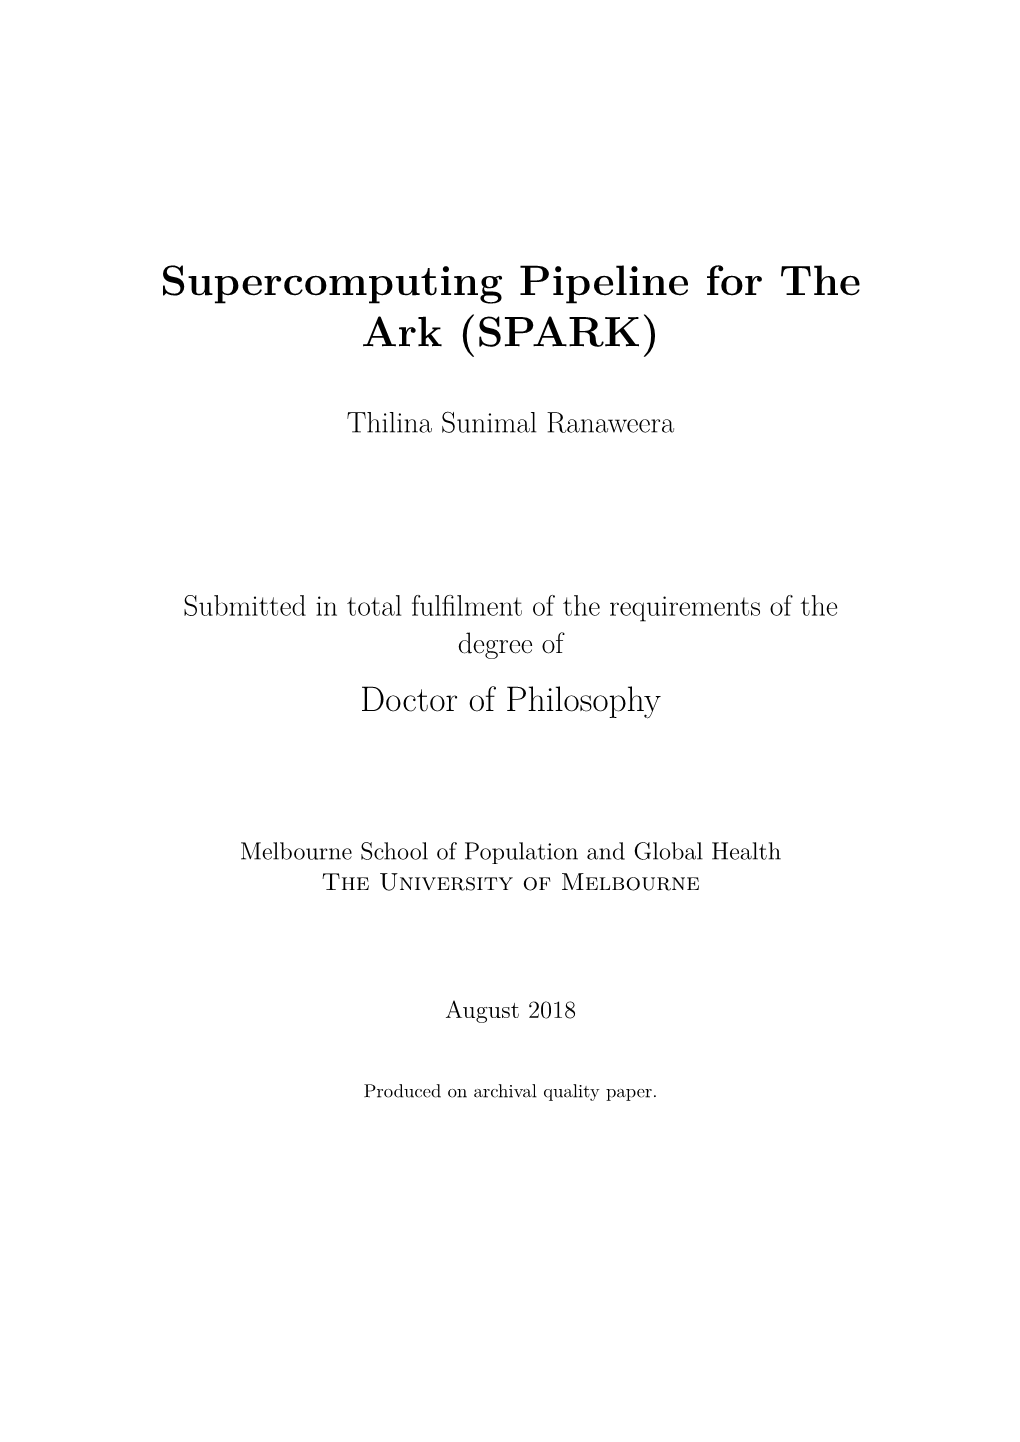 Supercomputing Pipeline for the Ark (SPARK) Thesis